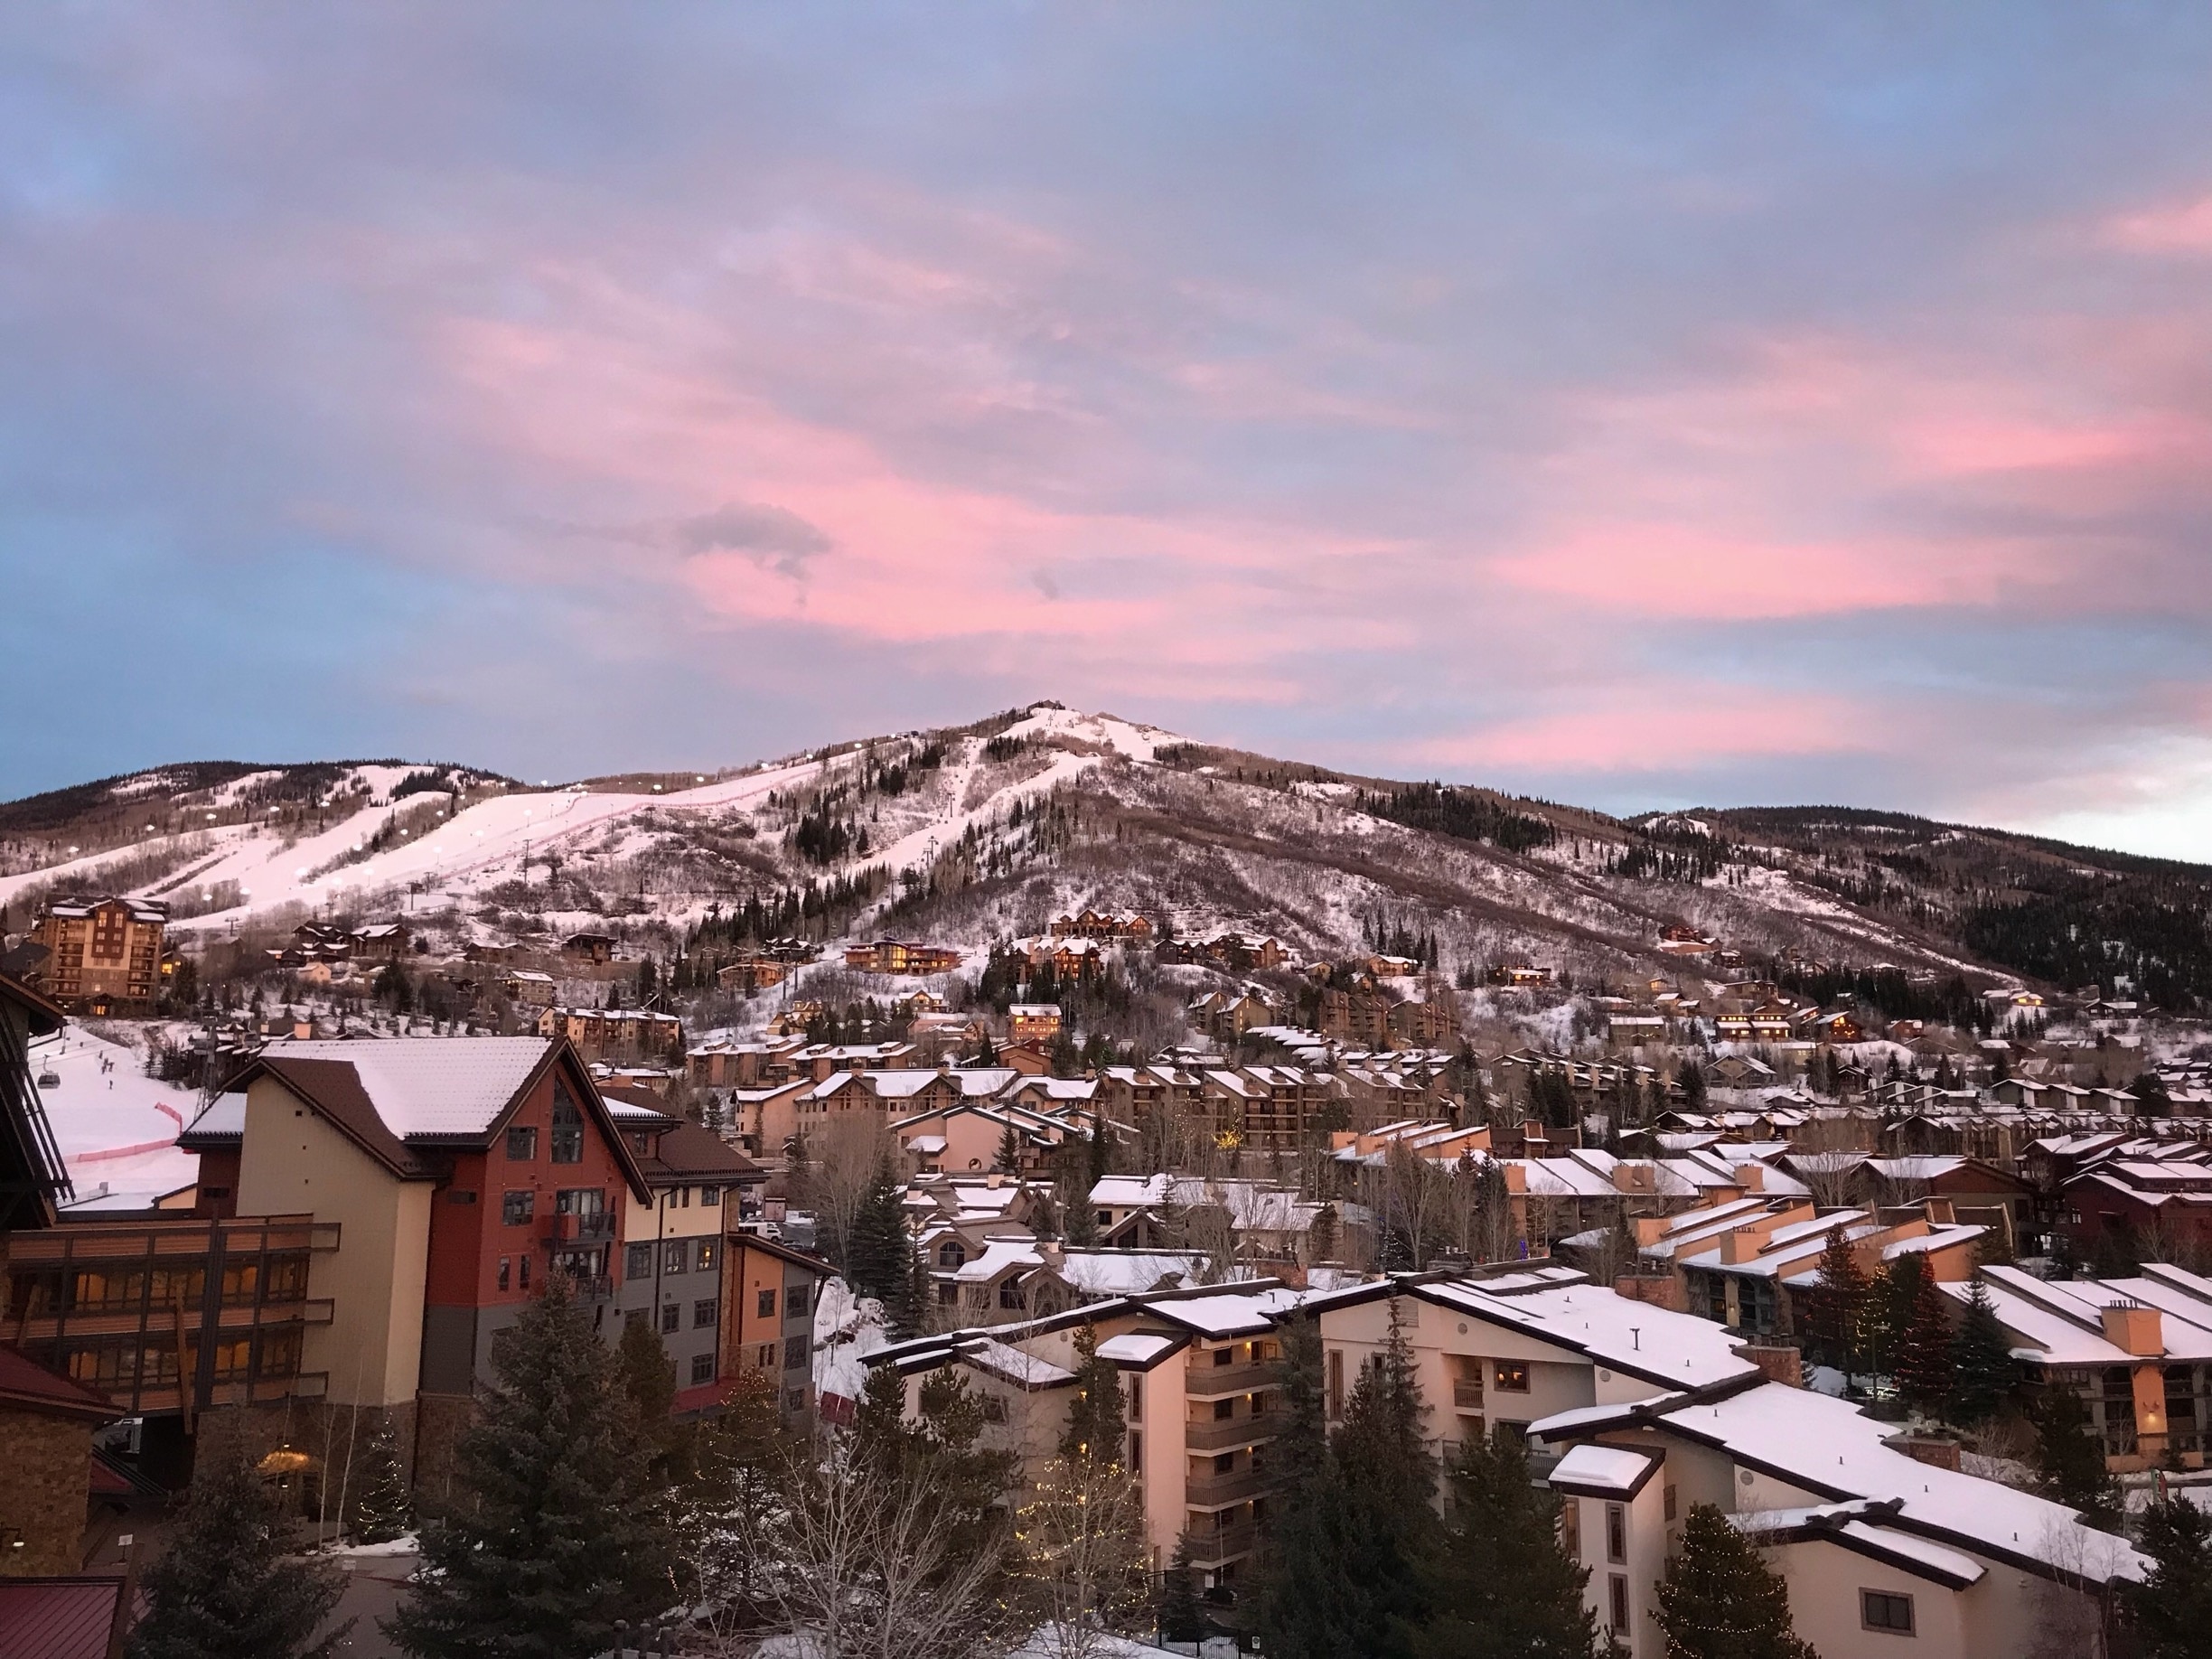 Sunset over Steamboat 